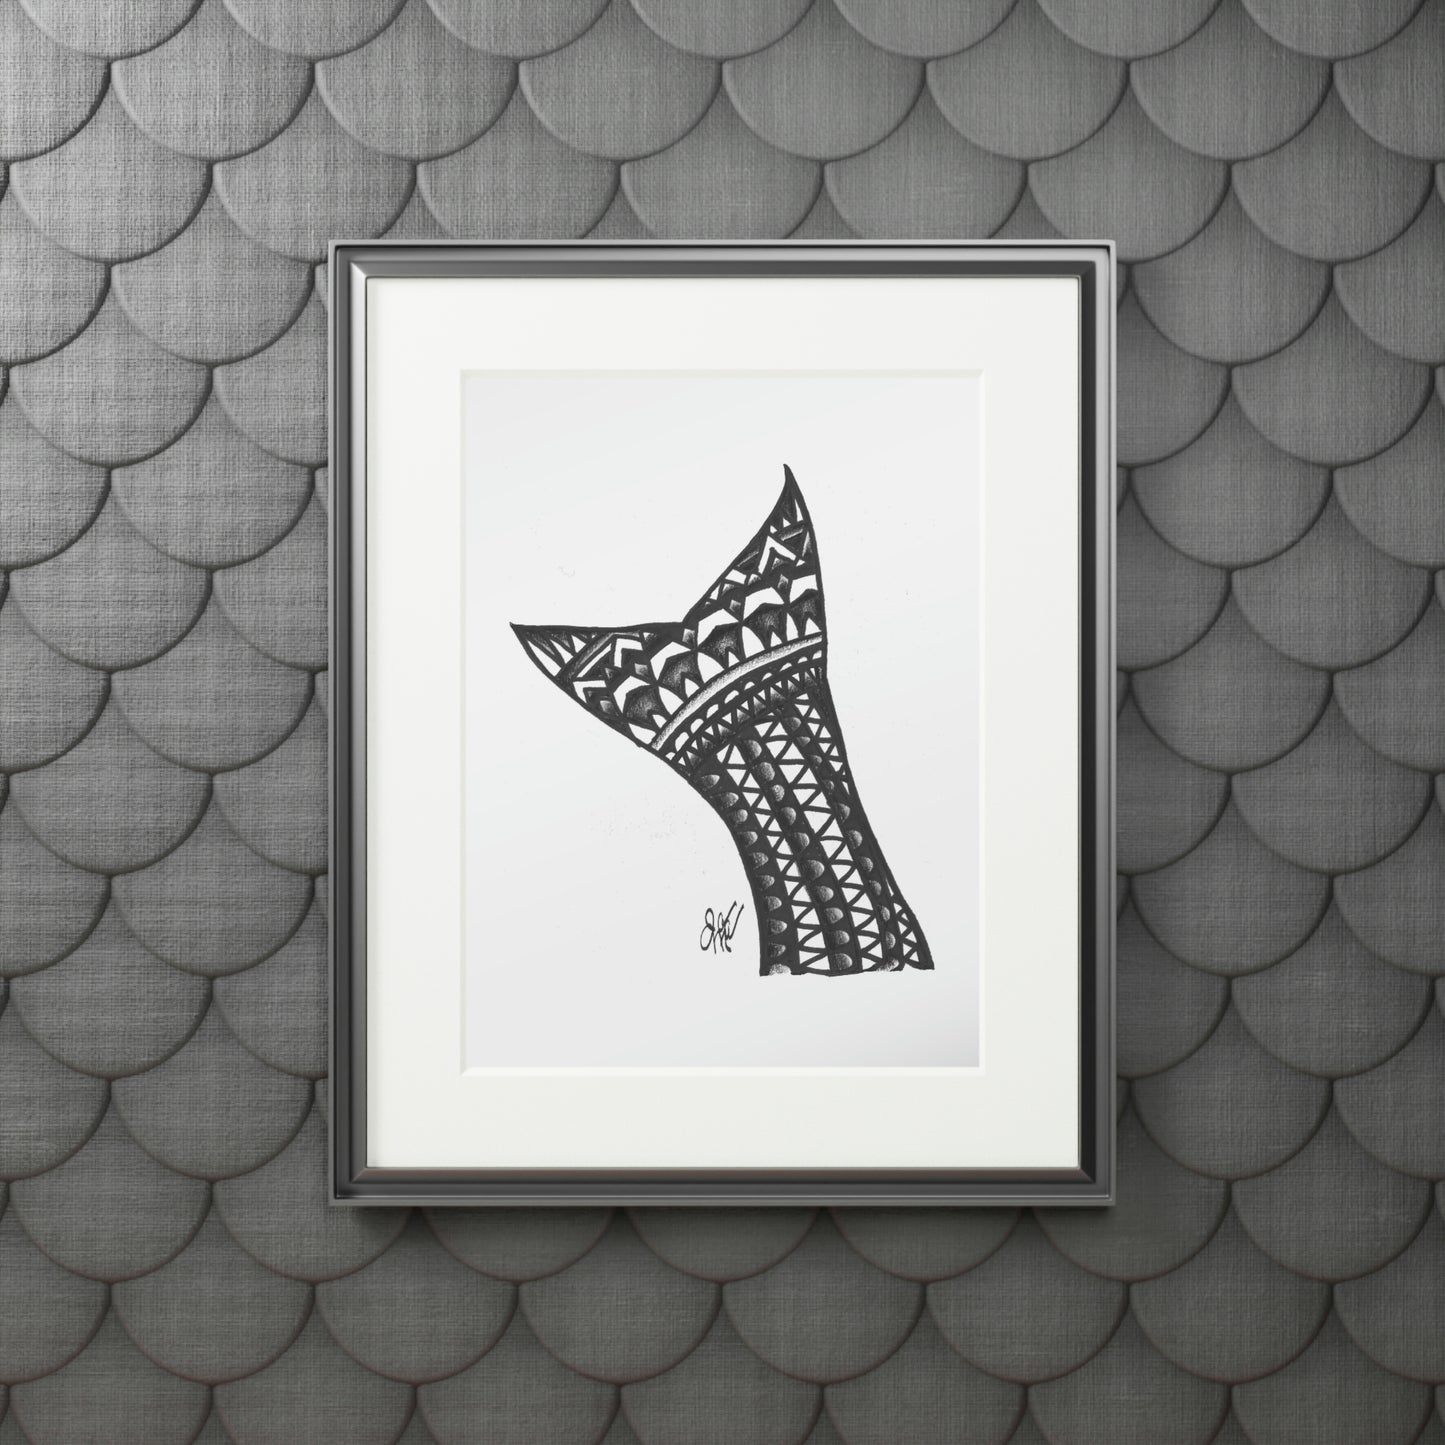 Tail-Whip Striped Bass Henna Tail Fine Art Prints (Passepartout Paper Frame)